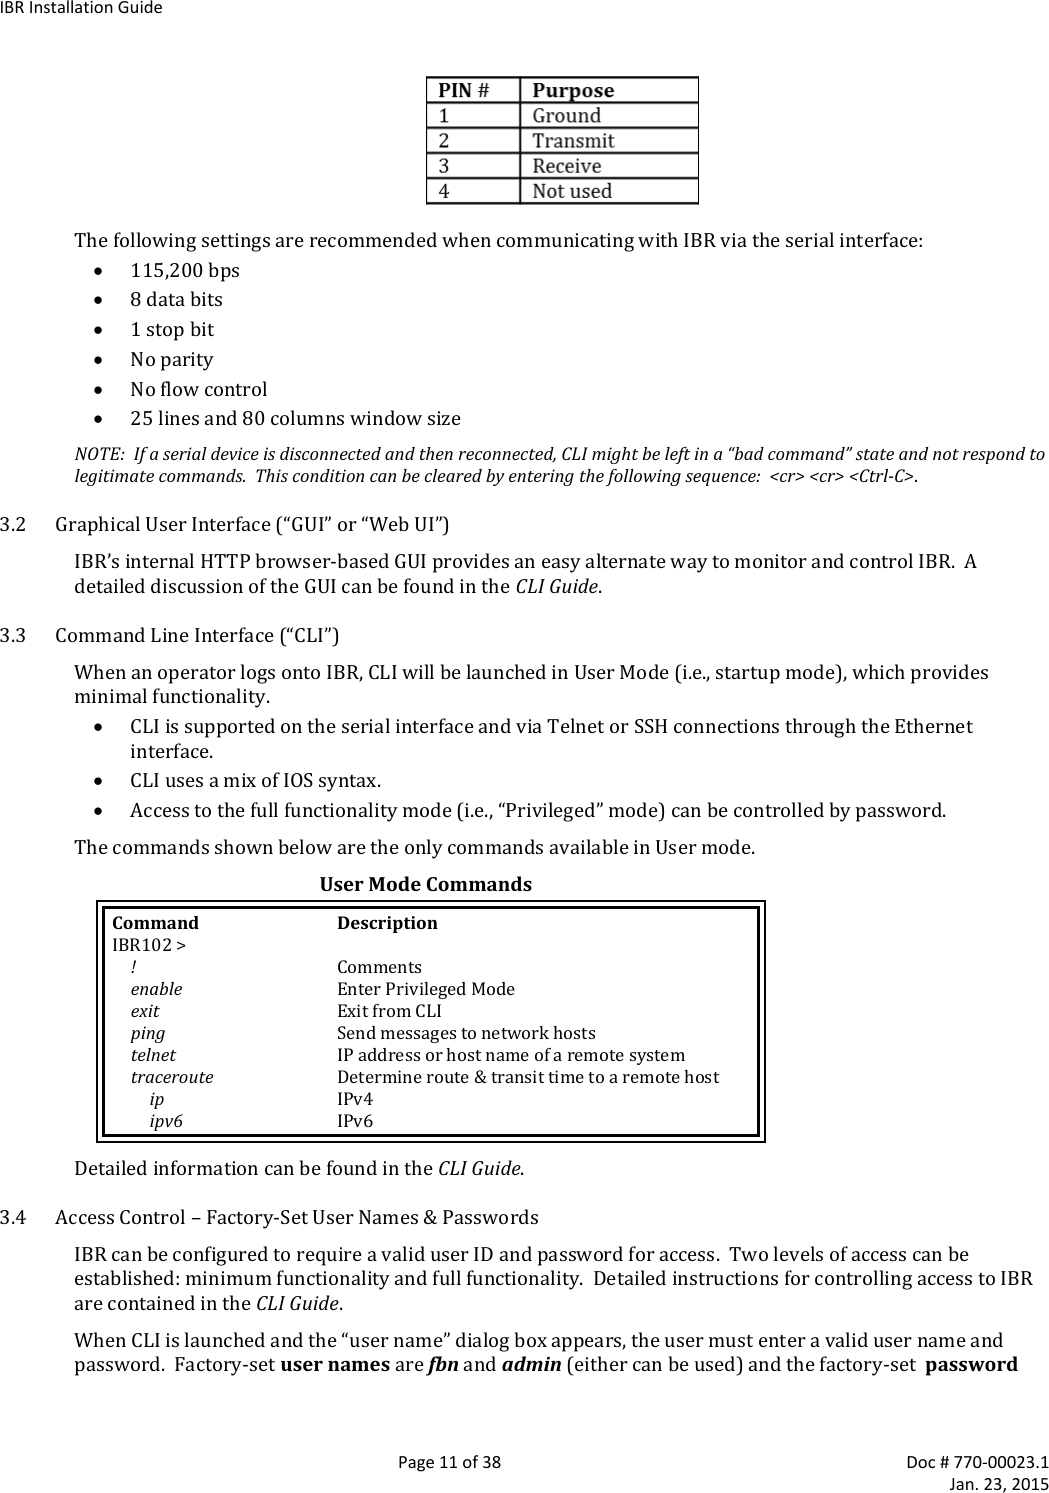 IBR Installation Guide   Page 11 of 38  Doc # 770-00023.1     Jan. 23, 2015  The following settings are recommended when communicating with IBR via the serial interface:  115,200 bps  8 data bits  1 stop bit  No parity  No flow control  25 lines and 80 columns window size NOTE:  If a serial device is disconnected and then reconnected, CLI might be left in a “bad command” state and not respond to legitimate commands.  This condition can be cleared by entering the following sequence:  &lt;cr&gt; &lt;cr&gt; &lt;Ctrl-C&gt;. 3.2 Graphical User Interface (“GUI” or “Web UI”) IBR’s internal HTTP browser-based GUI provides an easy alternate way to monitor and control IBR.  A detailed discussion of the GUI can be found in the CLI Guide.  3.3 Command Line Interface (“CLI”) When an operator logs onto IBR, CLI will be launched in User Mode (i.e., startup mode), which provides minimal functionality.  CLI is supported on the serial interface and via Telnet or SSH connections through the Ethernet interface.  CLI uses a mix of IOS syntax.  Access to the full functionality mode (i.e., “Privileged” mode) can be controlled by password.  The commands shown below are the only commands available in User mode.  User Mode Commands Command  Description IBR102 &gt;    !  Comments  enable  Enter Privileged Mode   exit  Exit from CLI   ping  Send messages to network hosts   telnet  IP address or host name of a remote system  traceroute  Determine route &amp; transit time to a remote host   ip IPv4     ipv6  IPv6 Detailed information can be found in the CLI Guide.  3.4 Access Control – Factory-Set User Names &amp; Passwords IBR can be configured to require a valid user ID and password for access.  Two levels of access can be established: minimum functionality and full functionality.  Detailed instructions for controlling access to IBR are contained in the CLI Guide. When CLI is launched and the “user name” dialog box appears, the user must enter a valid user name and password.  Factory-set user names are fbn and admin (either can be used) and the factory-set  password 